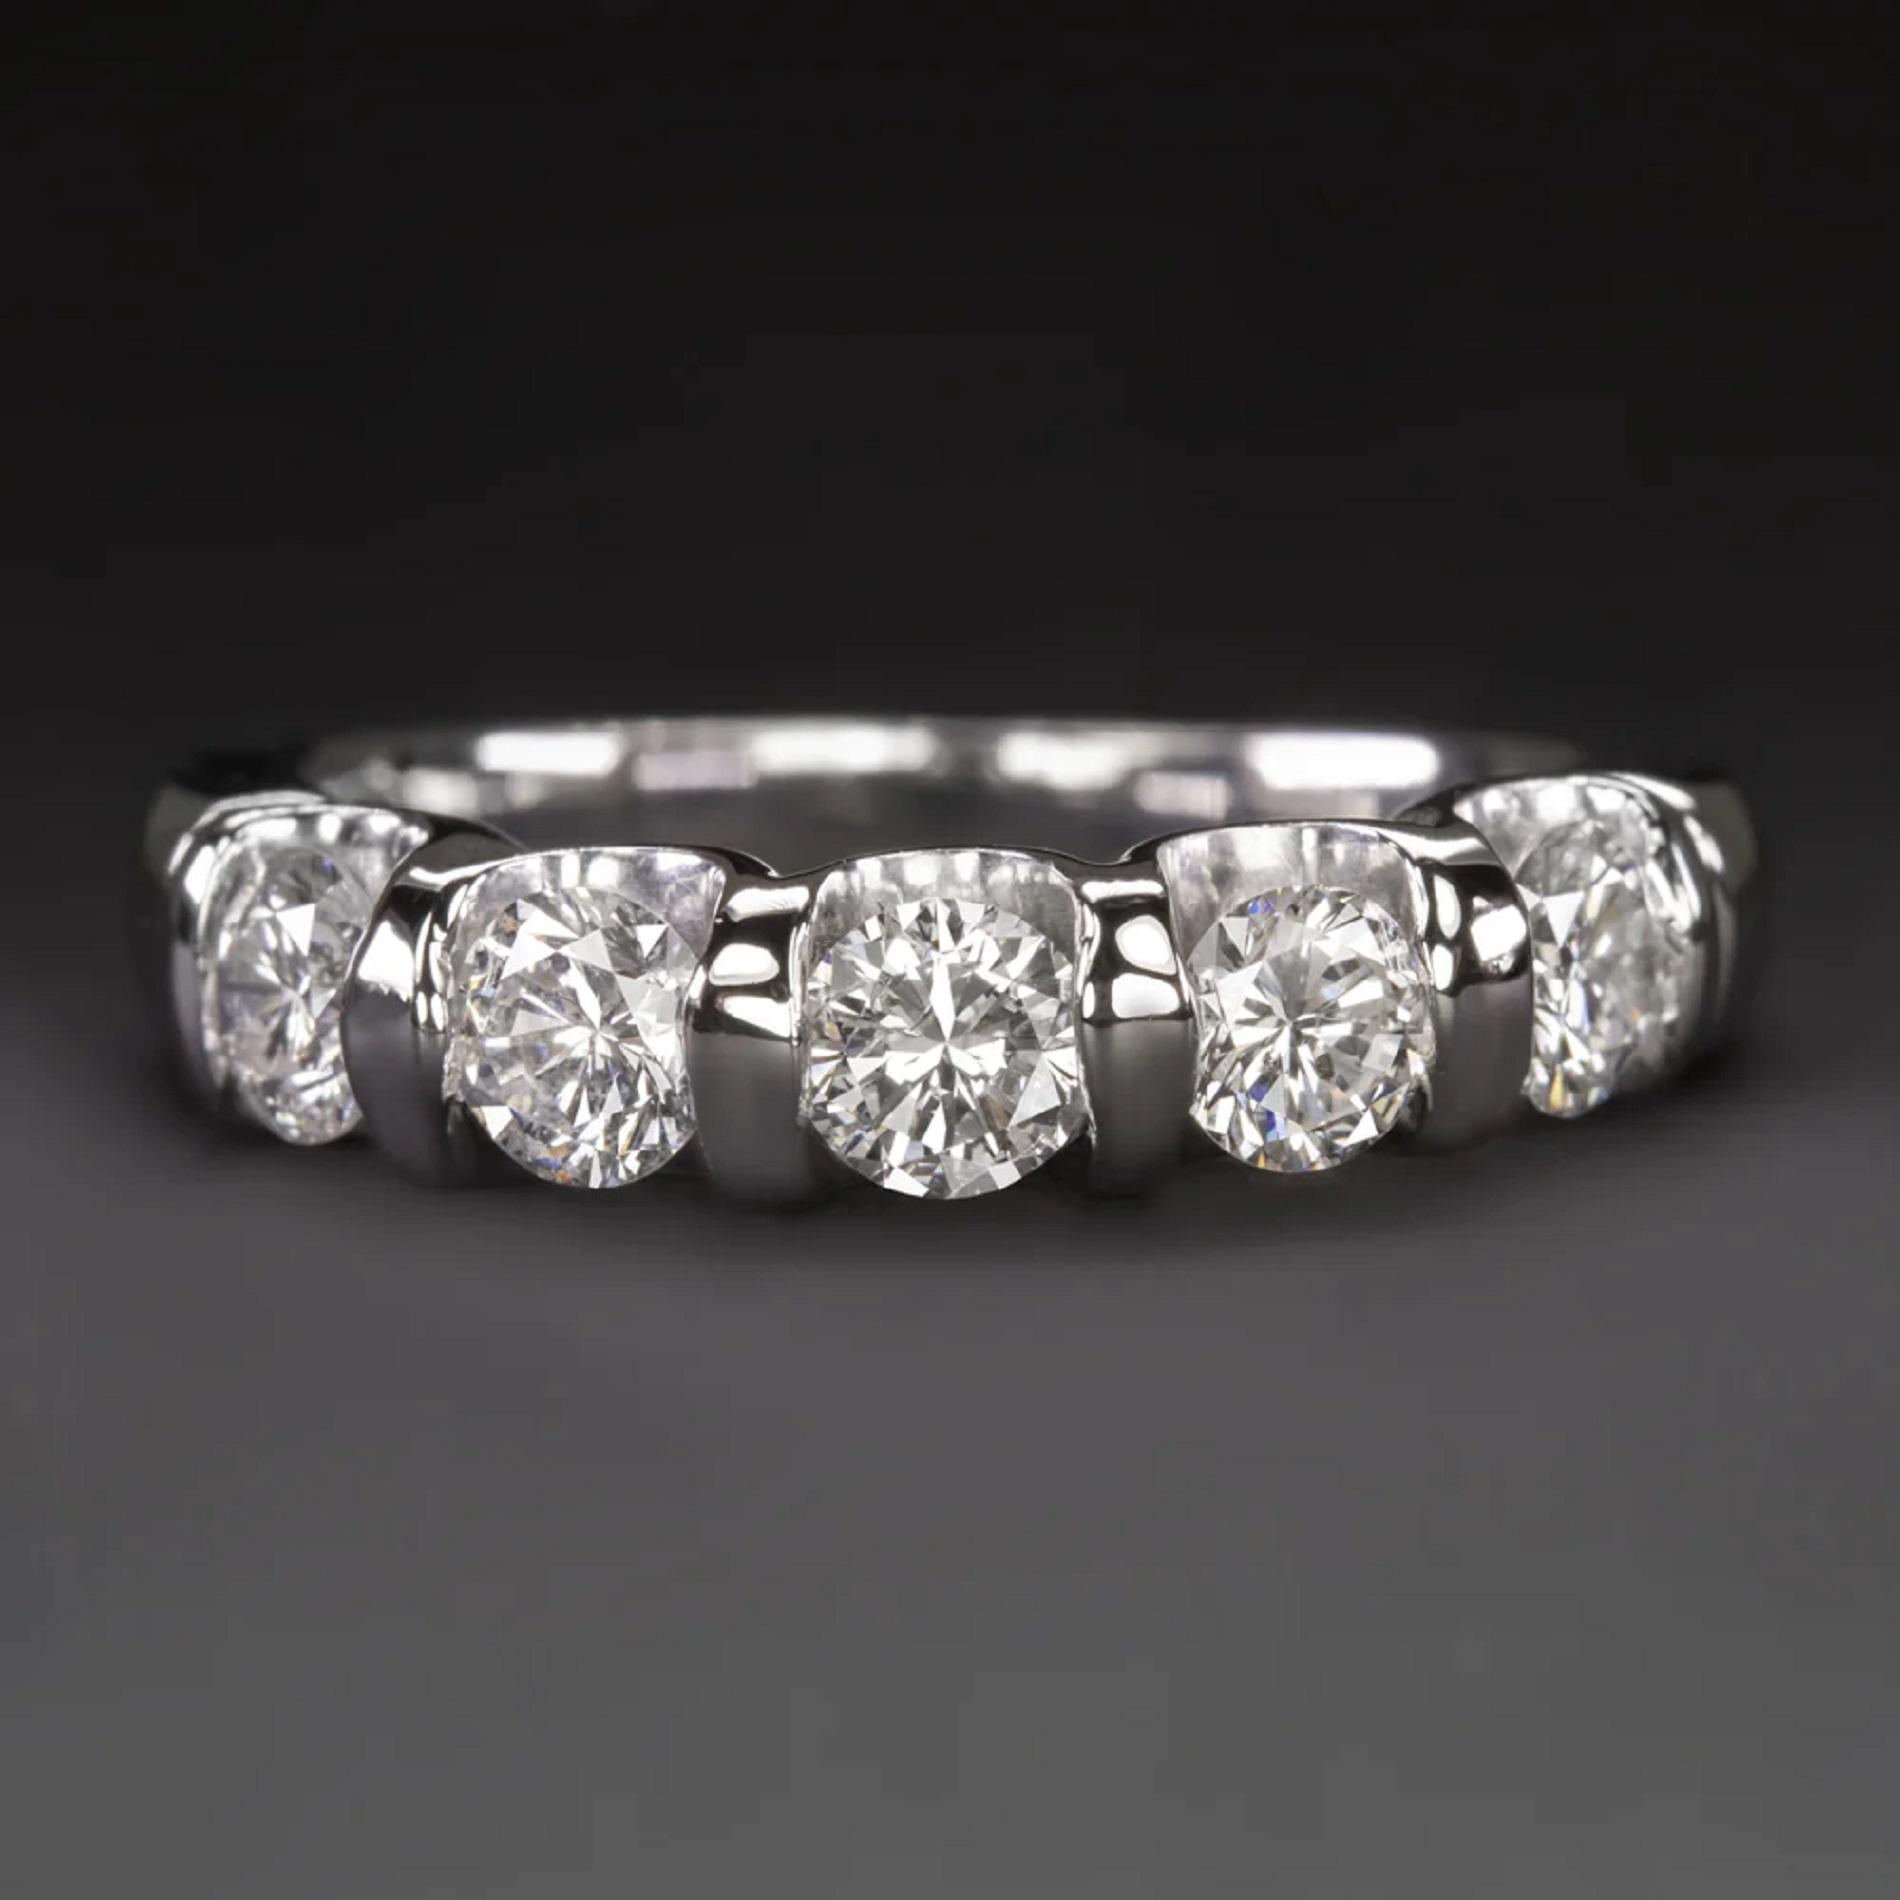  1 carat of bright white and eye clean diamonds

- Diamonds are excellent cut for fantastic sparkle!

- Substantial 14k white gold setting

- Classic 5 stone design

Dimensions:

The ring measures 4.1mm across (north south) and 4.2mm from finger to